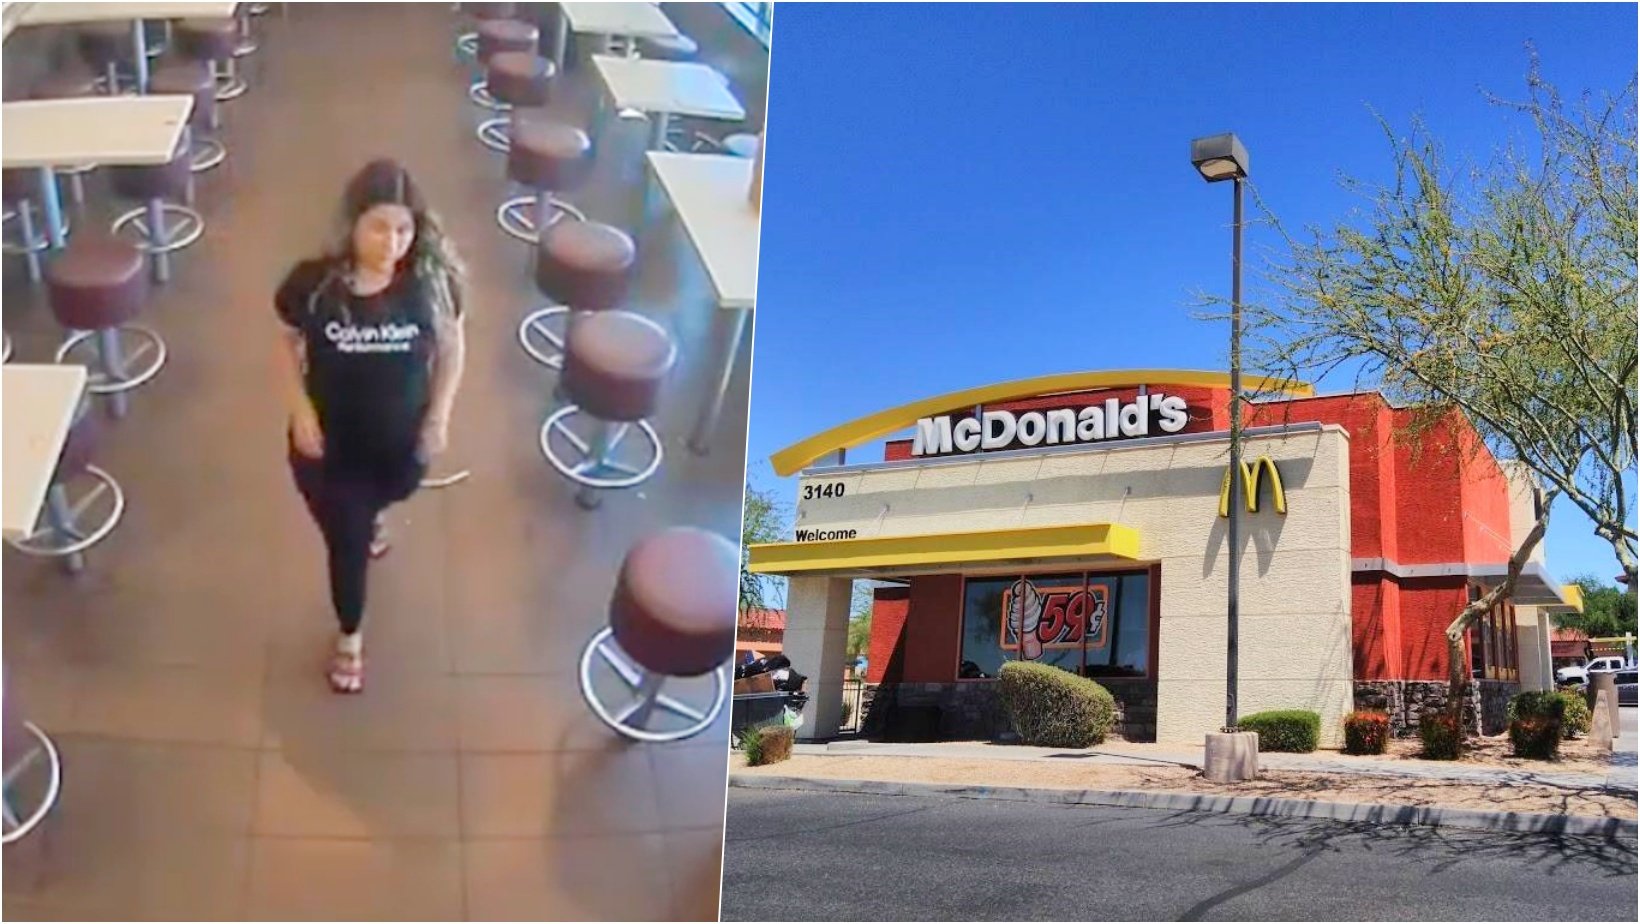 6 facebook cover 6.jpg?resize=412,232 - Newborn Was FOUND DEAD Inside McDonald’s Bathroom In West Phoenix With Authorities Searching For A Woman